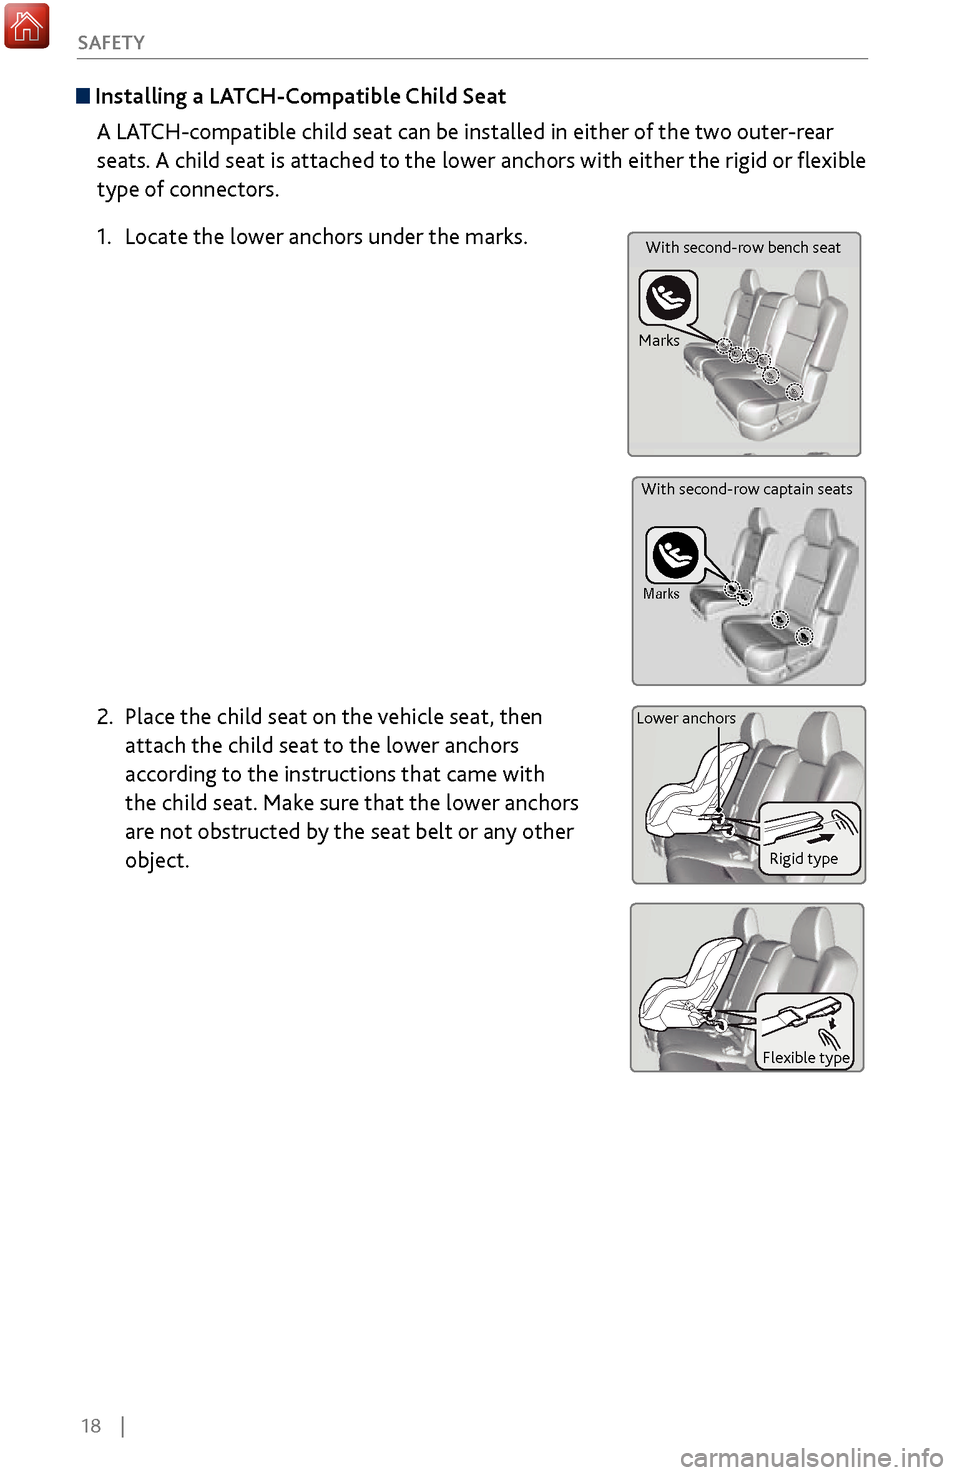 Acura MDX 2017 Owners Manual 18    |
S
AFETY
 Installing a LATCH-Compatible Child Seat
A LATCH-compatible child seat can be installed in either of the two outer-rear 
seats. A child seat is attached to the lower anchors with eith